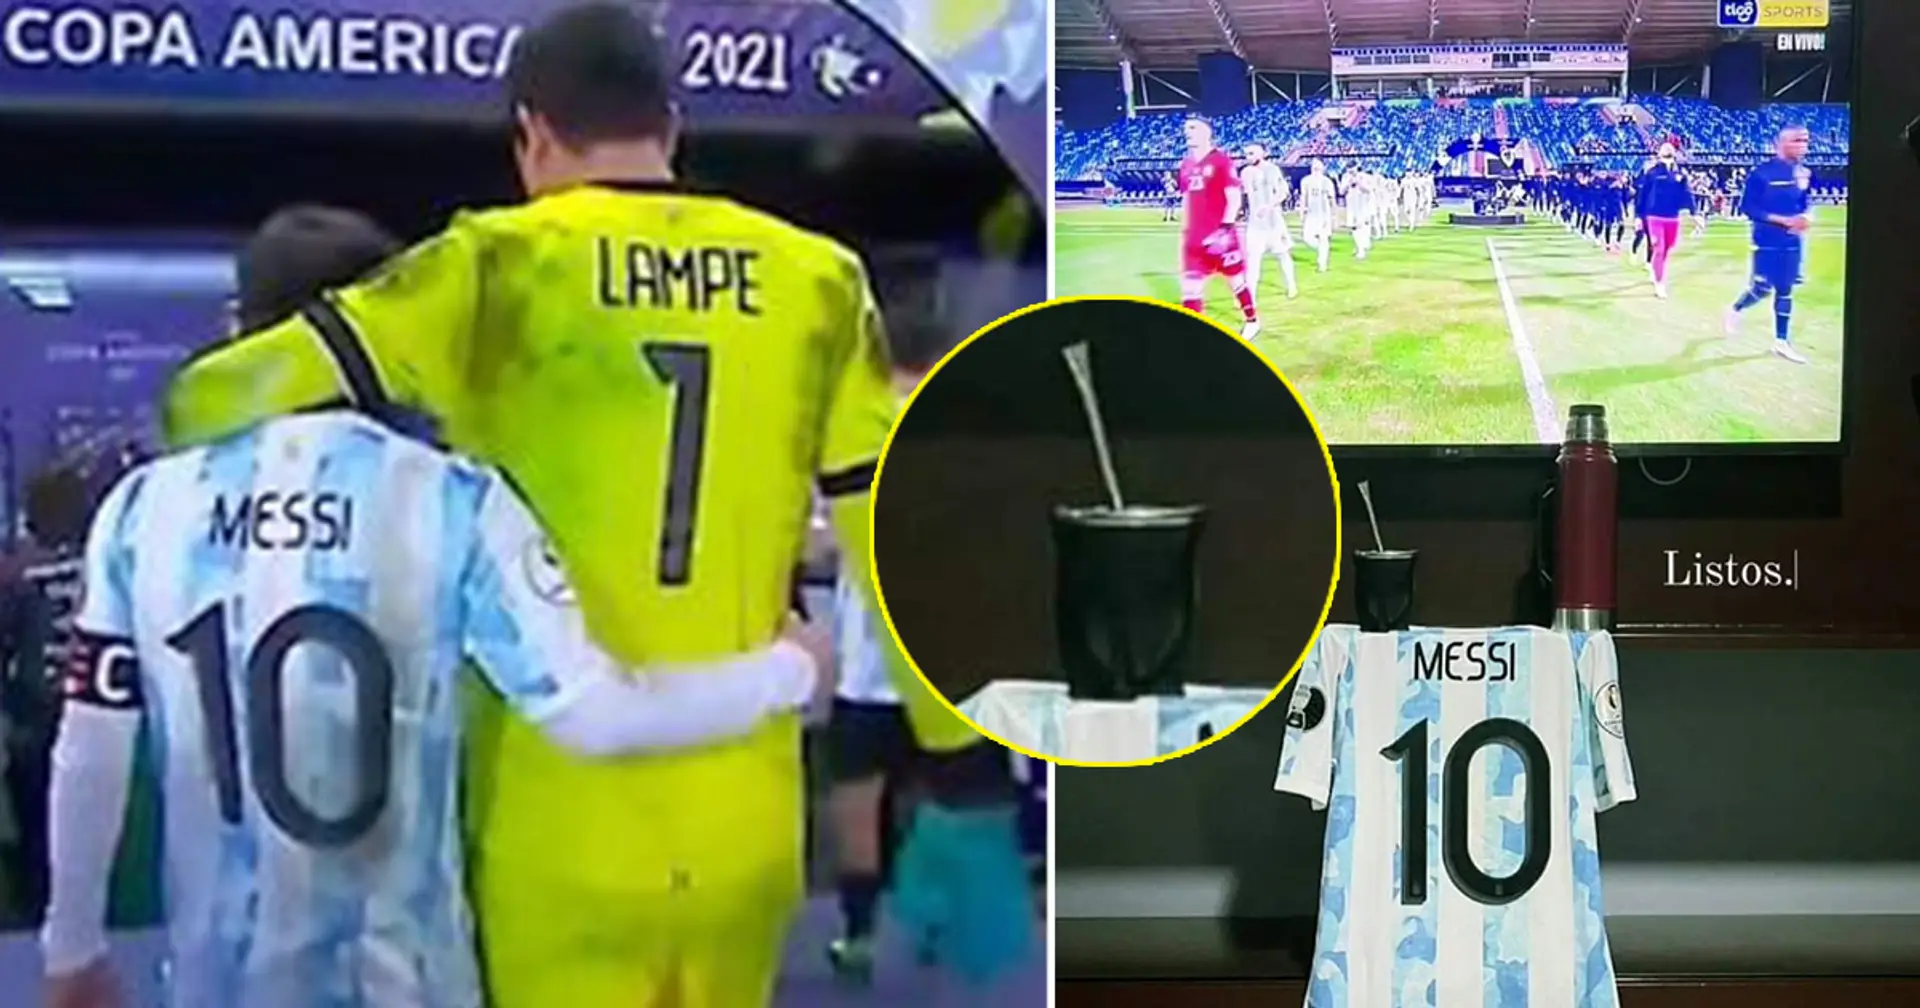 New bromance incoming? Bolivia goalie who conceded 2 against Messi sends awesome message to Leo